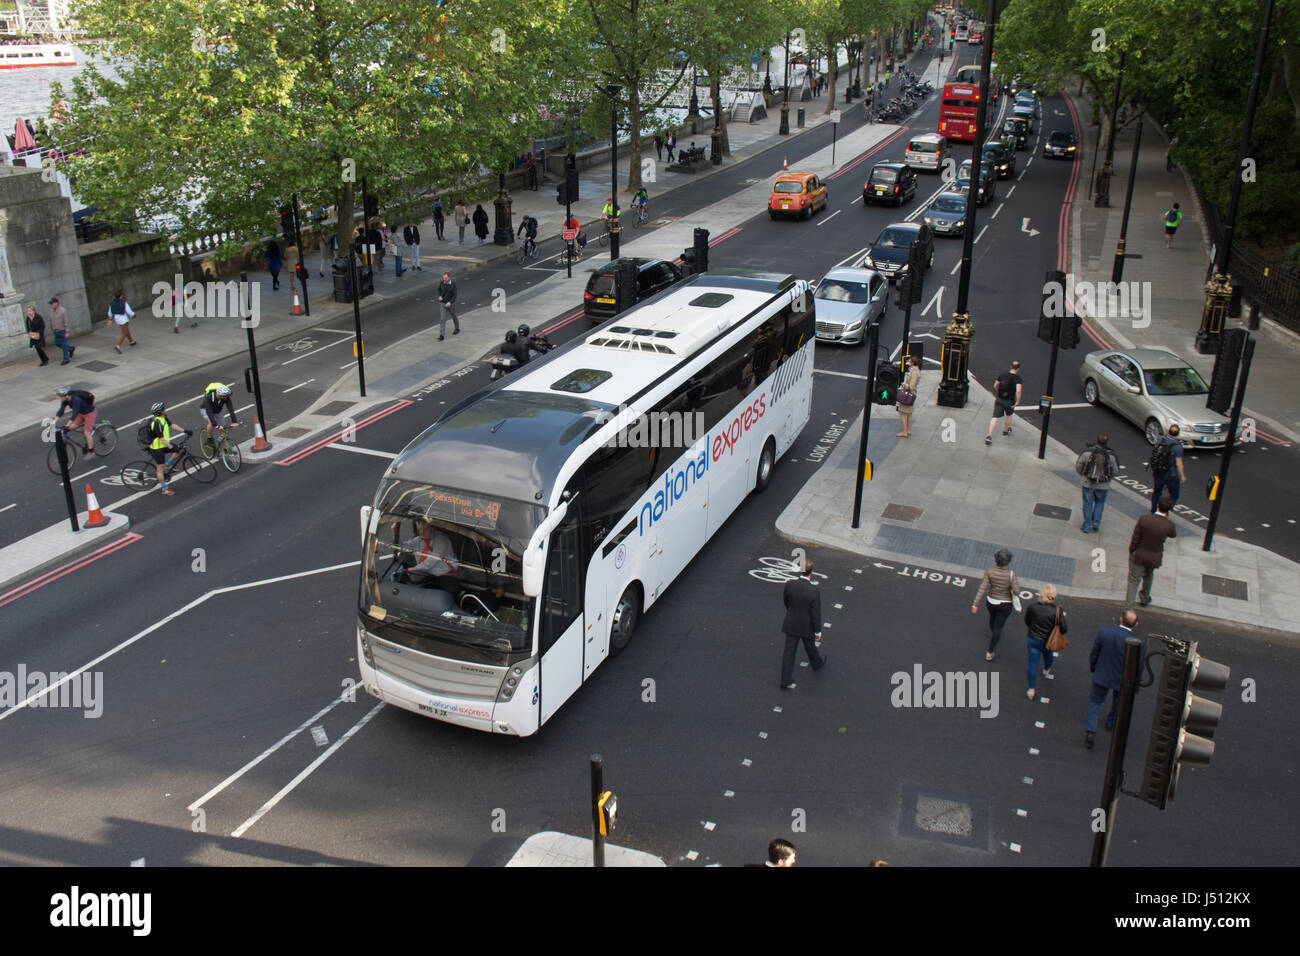 London, England - May 24, 2016: A National Express coach on the Embankment road near Westminster in central London. Stock Photo